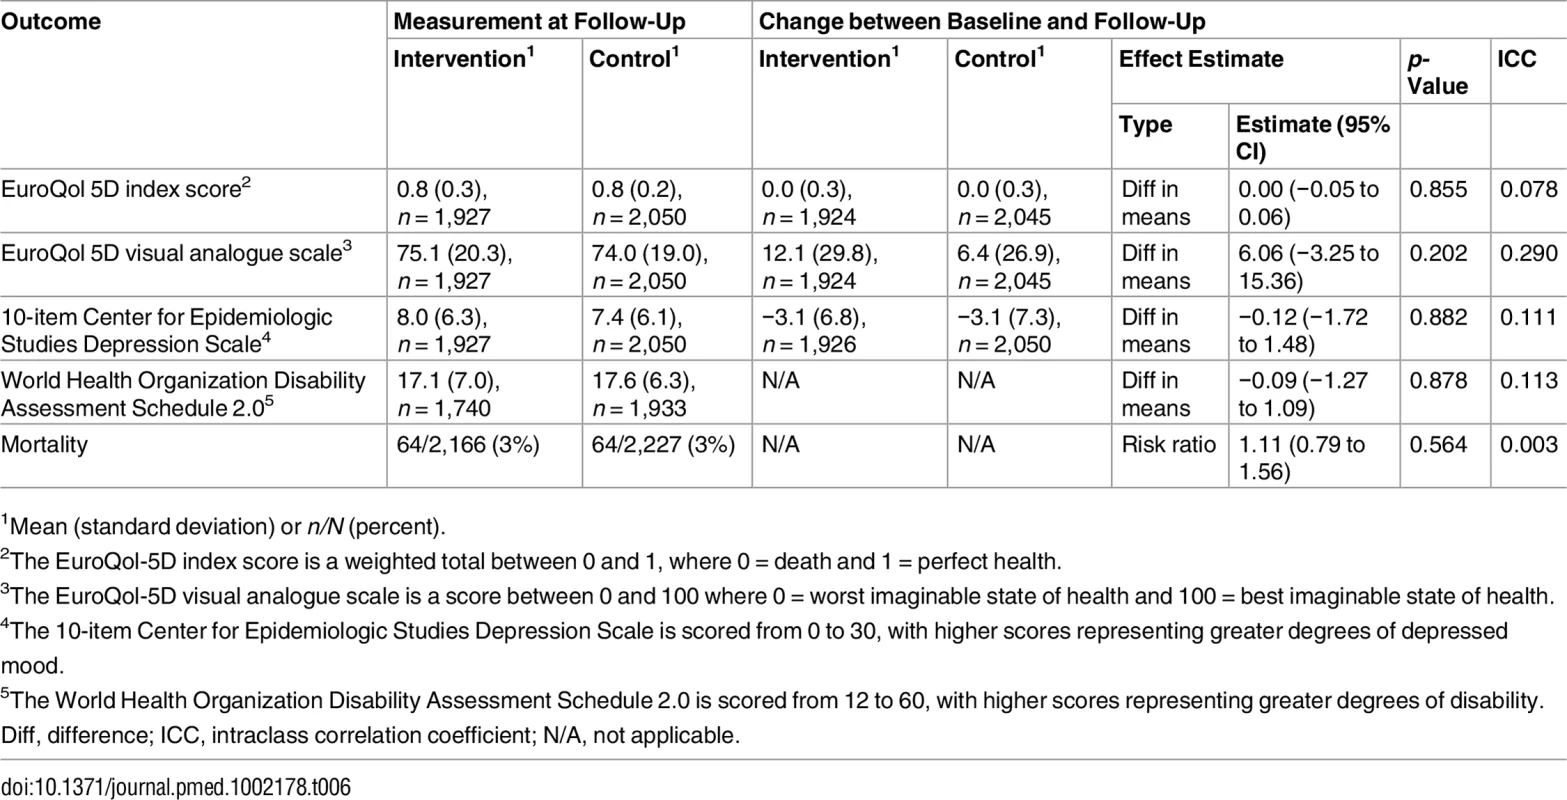 Effect on quality of life, depression, and mortality.